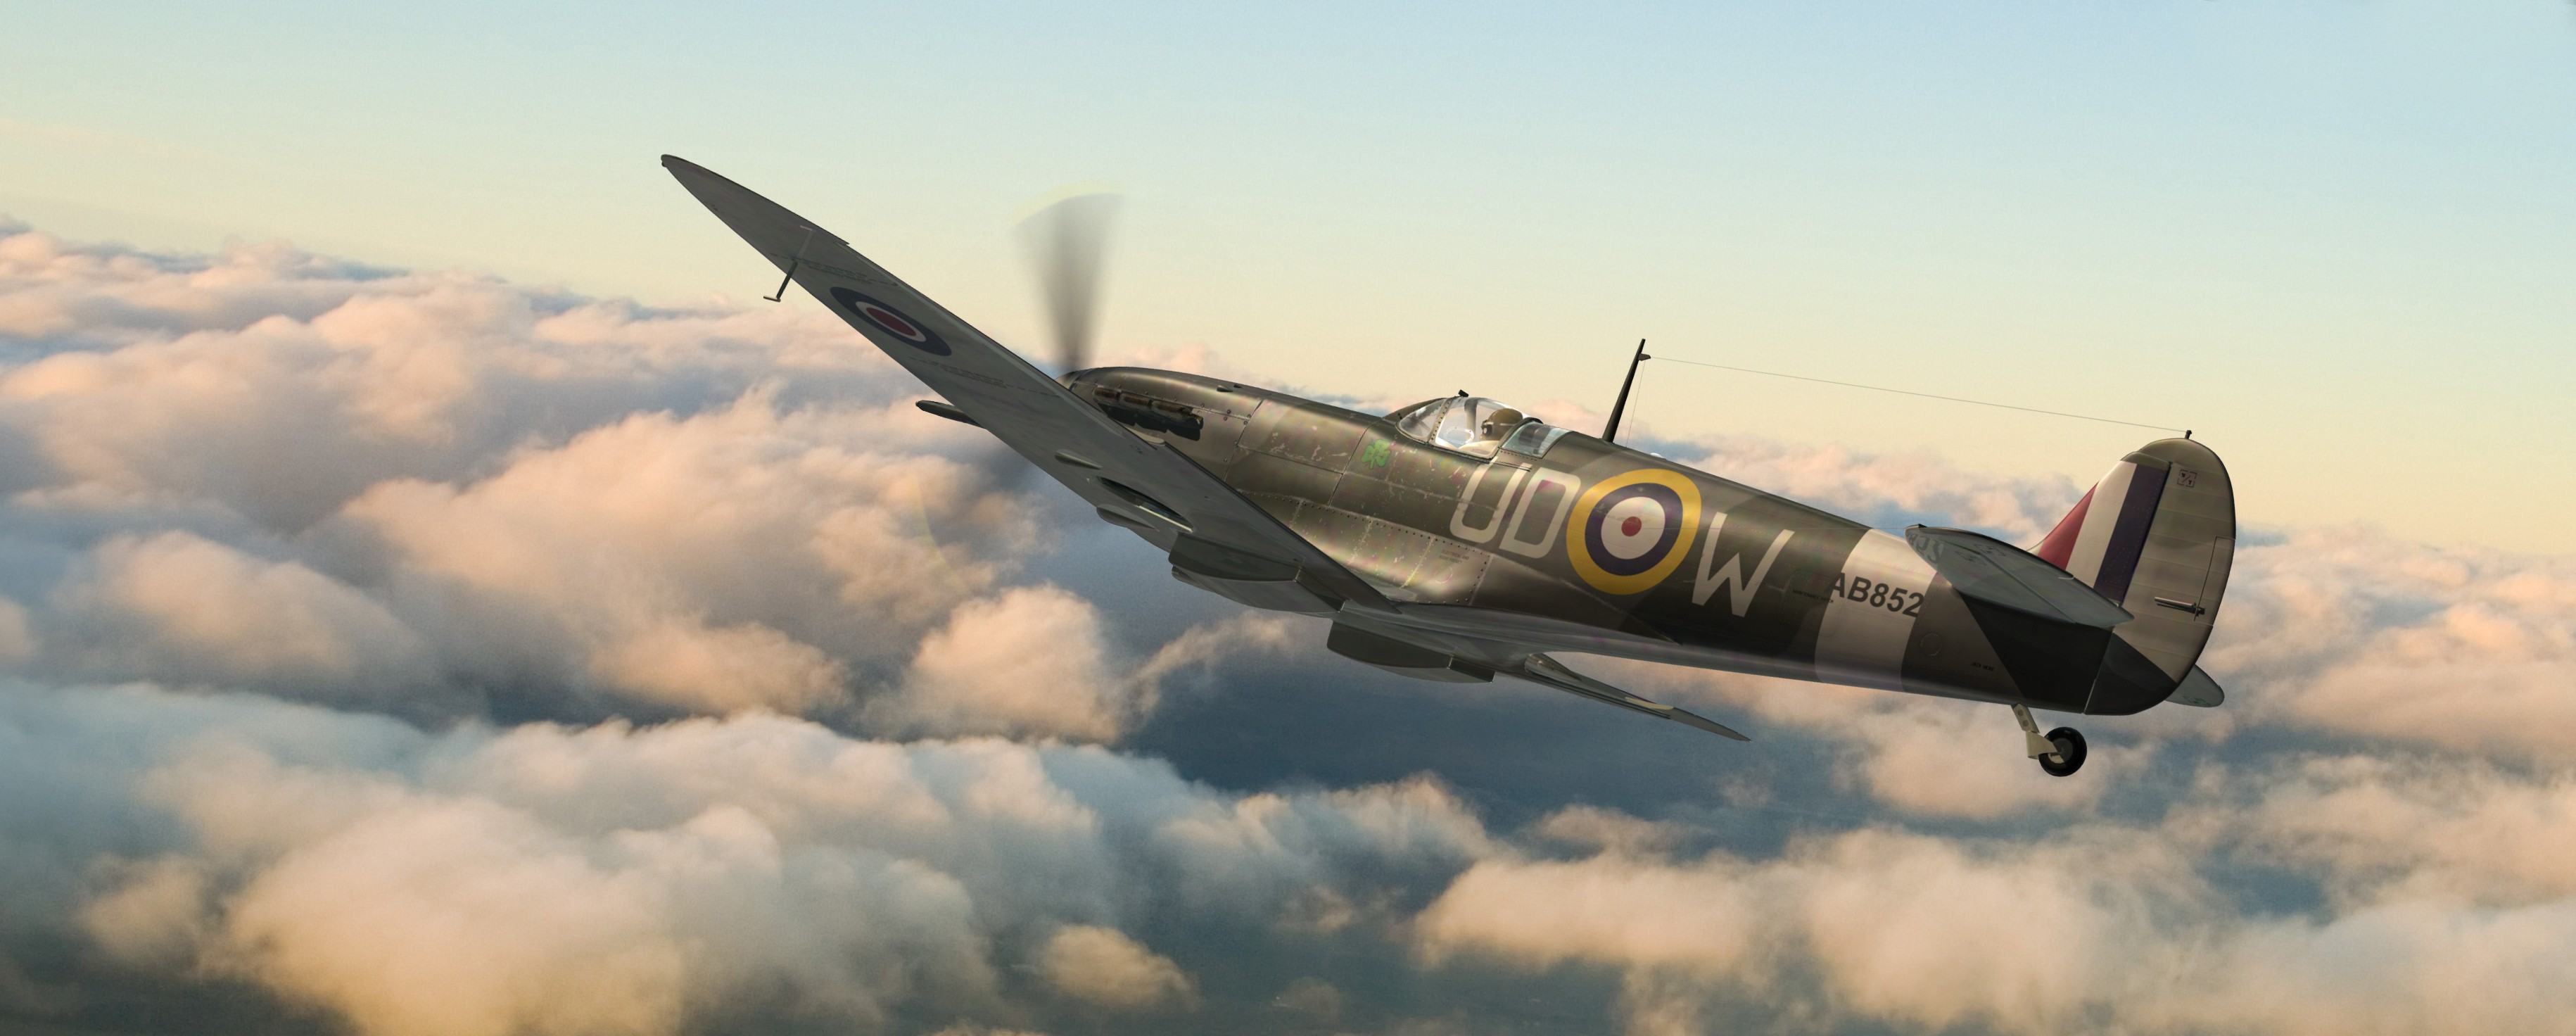 World War Ii Military Aircraft Military Aircraft Airplane Spitfire Supermarine Spitfire Royal Airfor 3661x1472